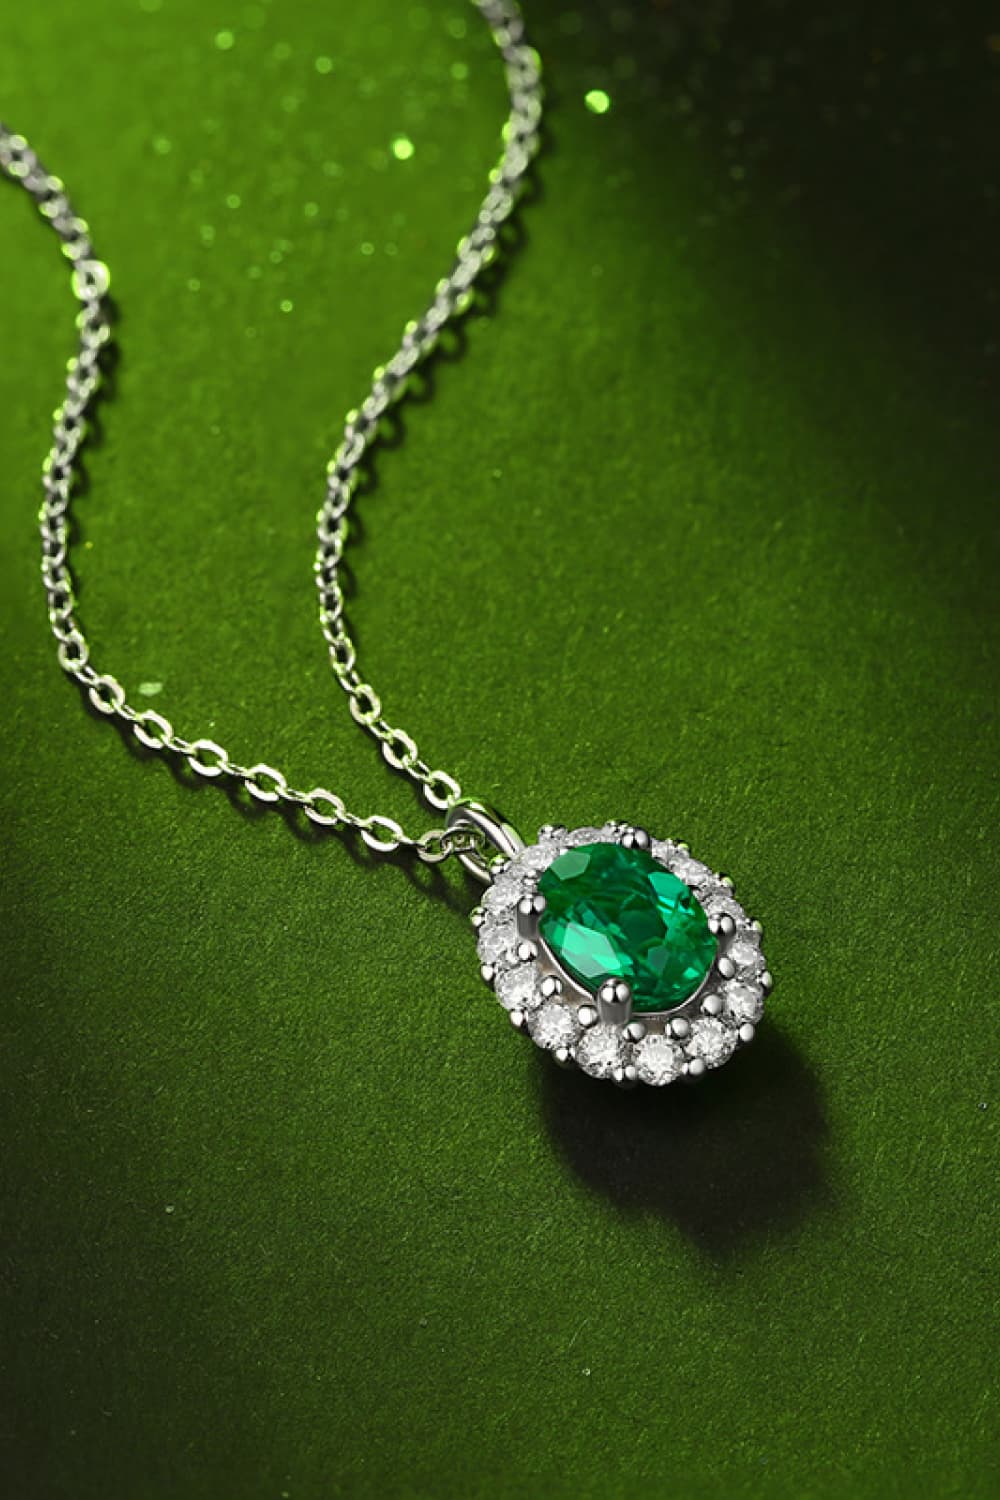 Jewelry 1.5 Carat Lab-Grown Emerald 925 Sterling Silver Necklace